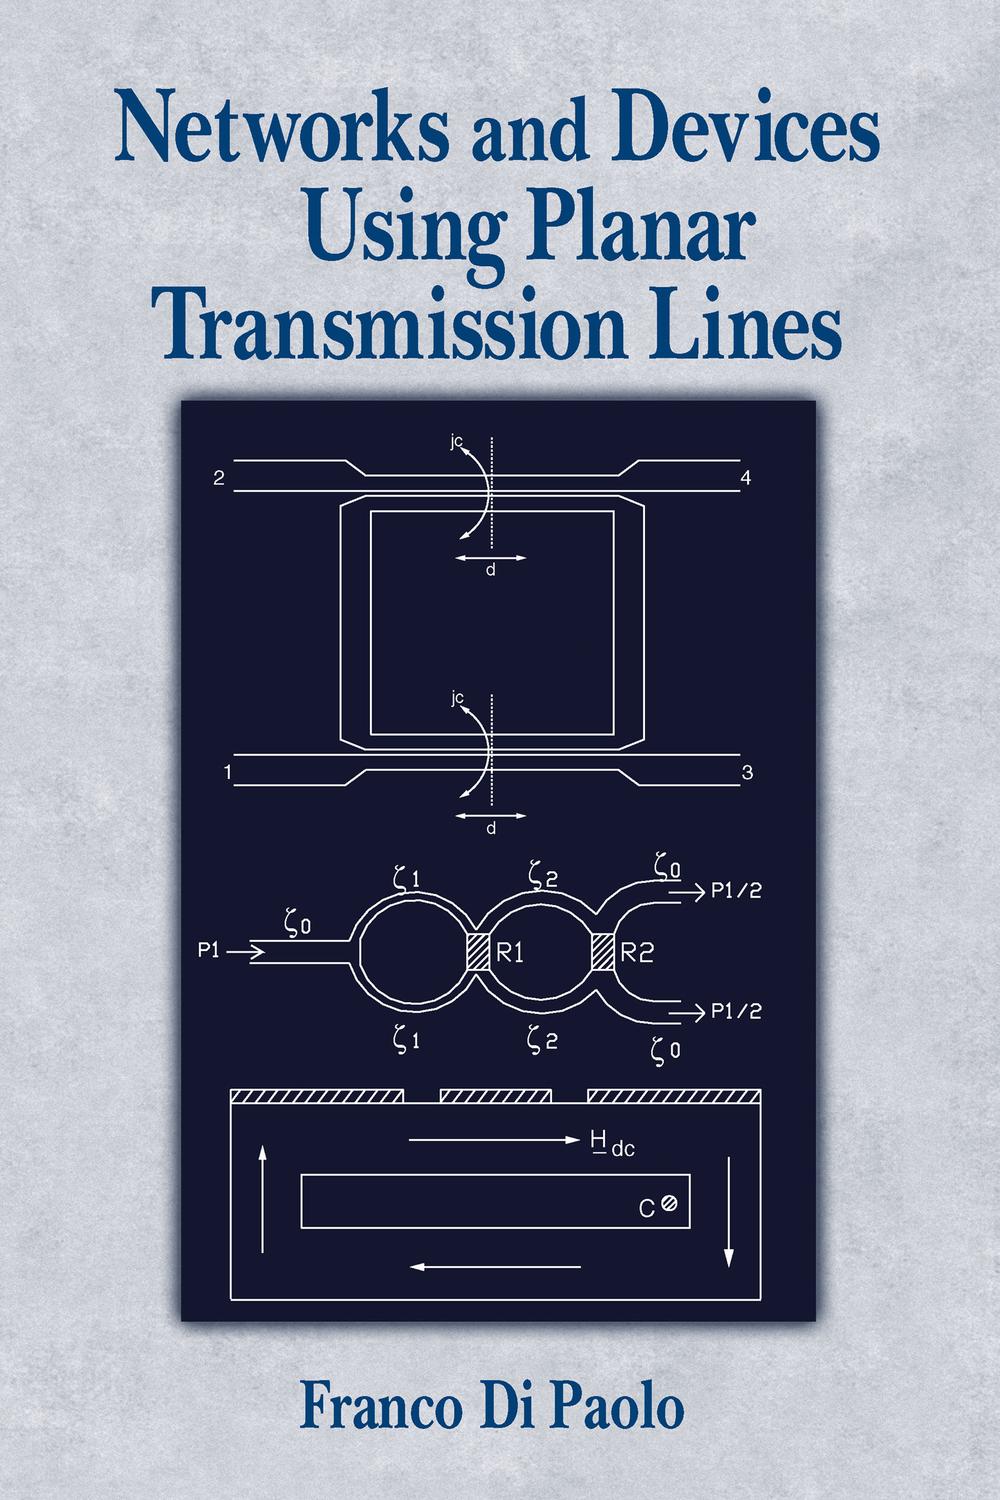 Networks and Devices Using Planar Transmissions Lines - Franco Di Paolo